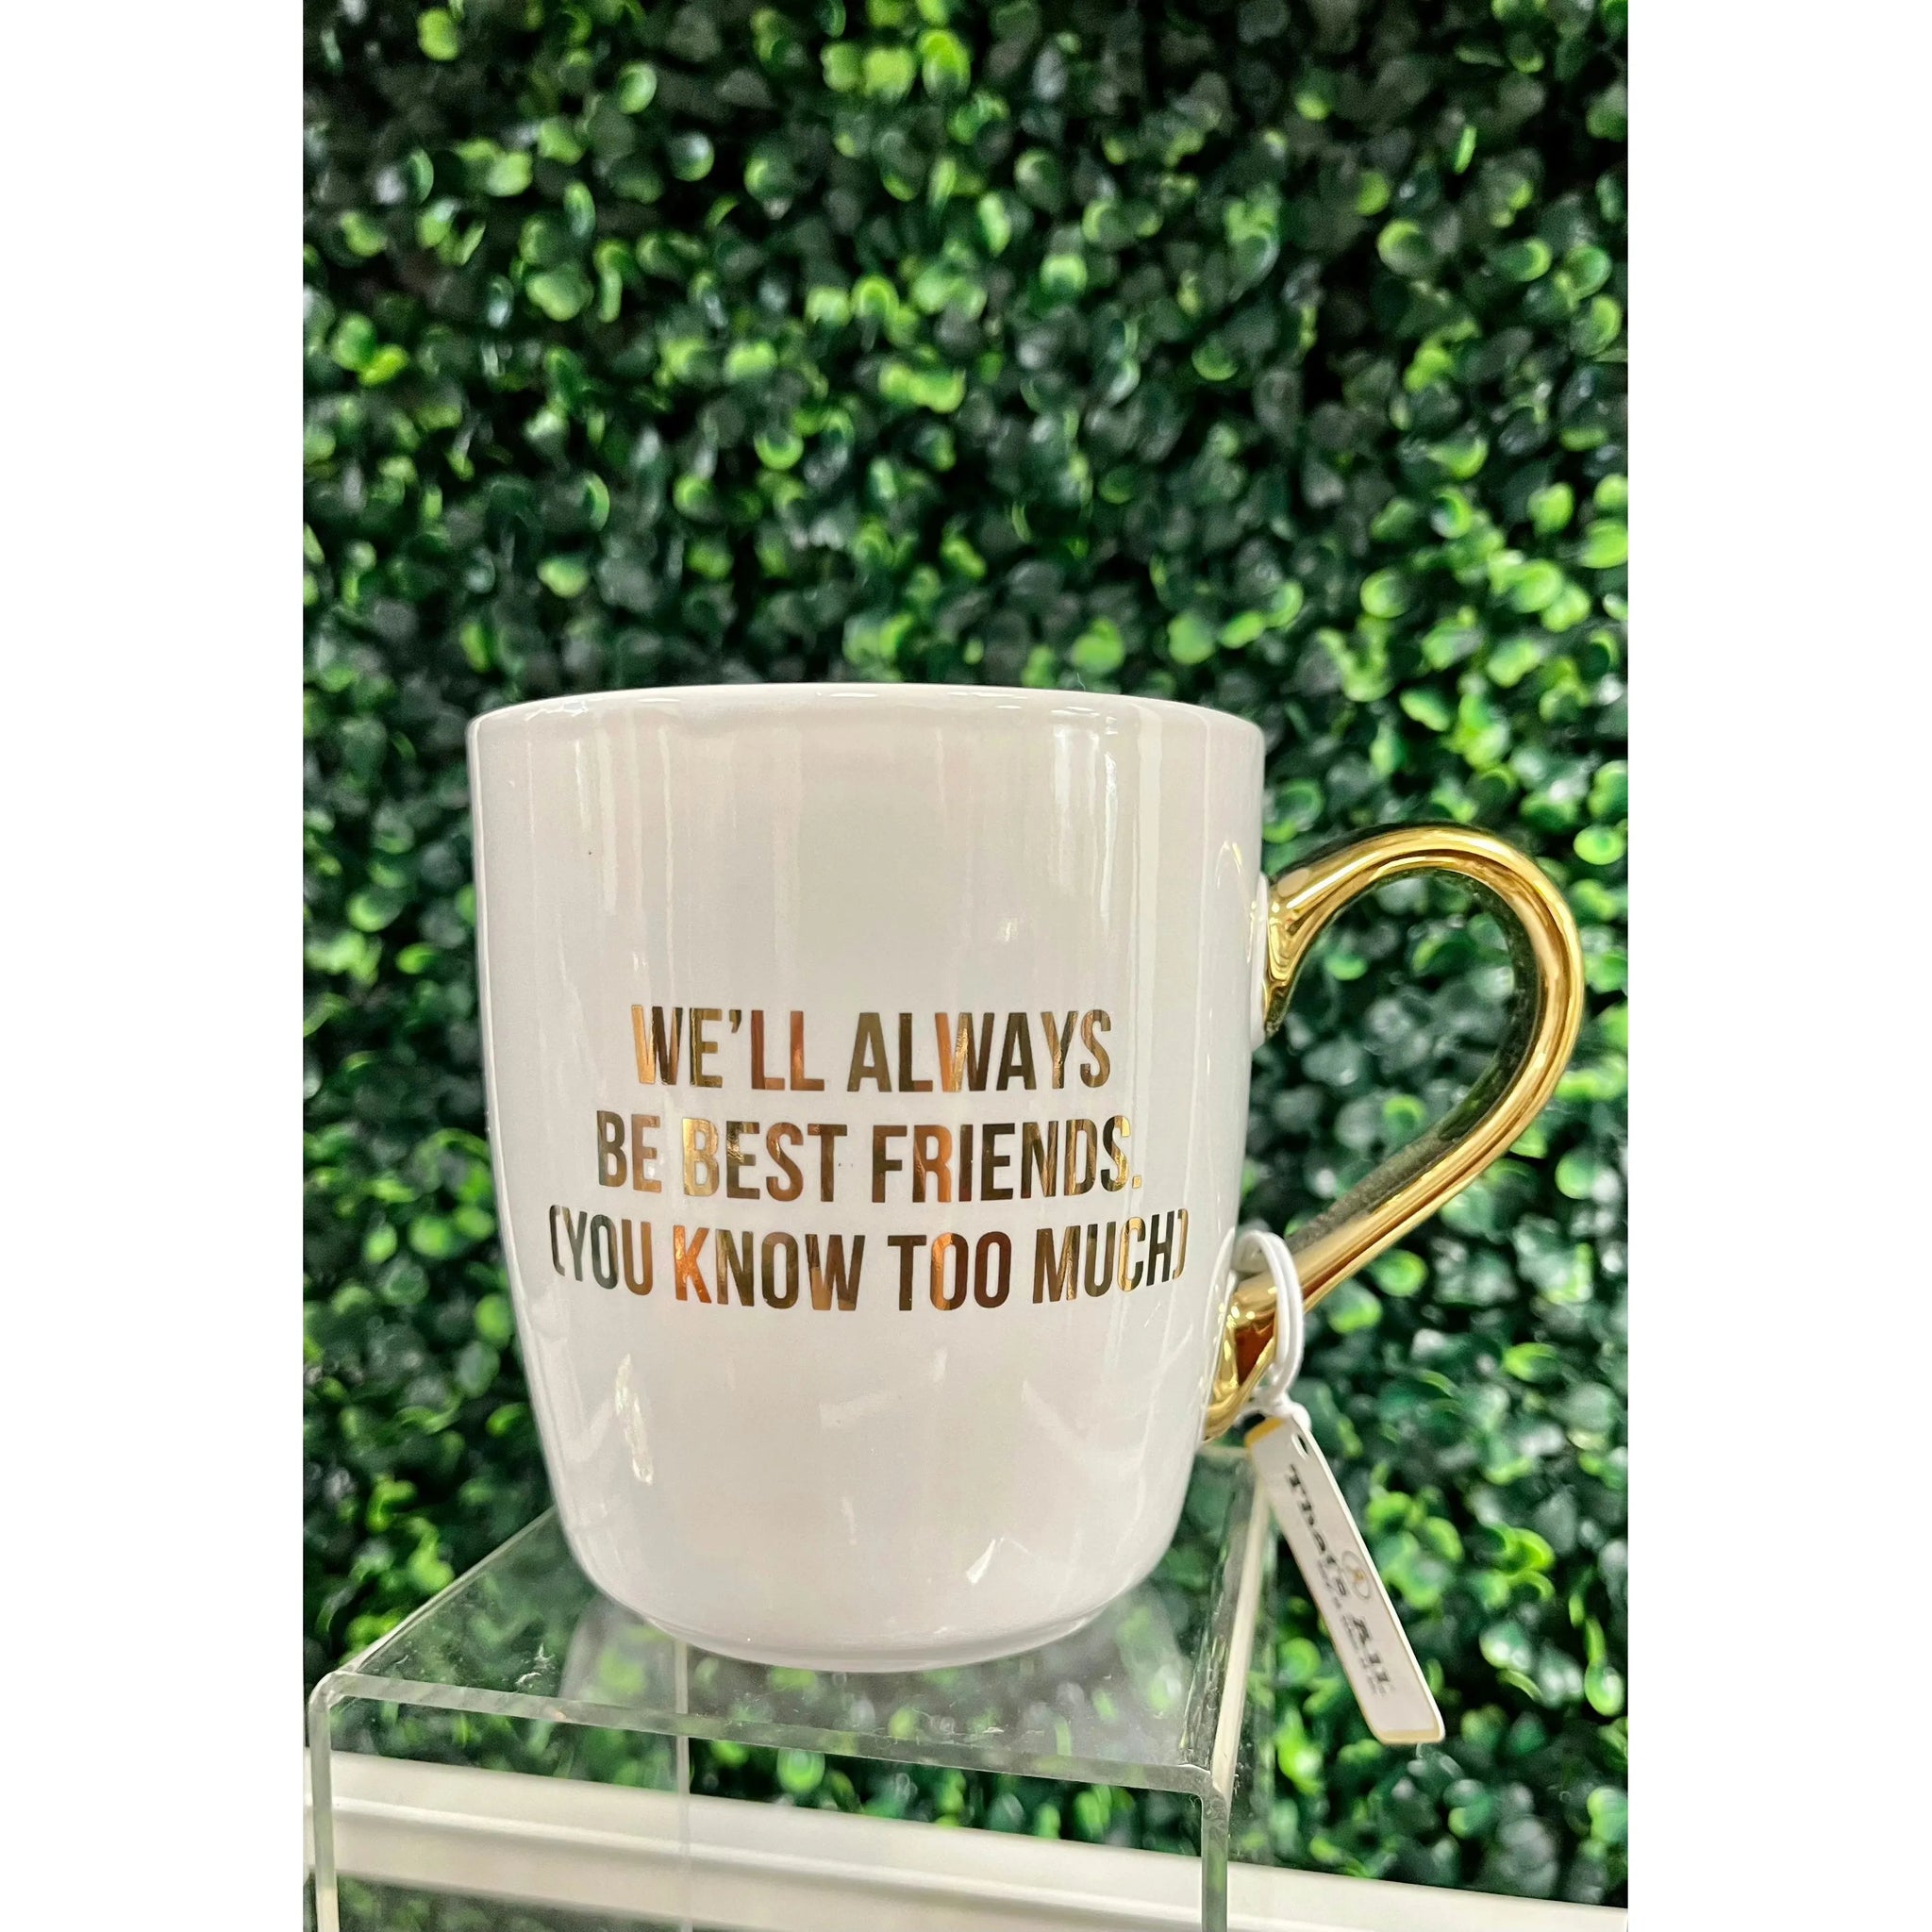 front view showing the gold handle and gold font in the phrase: We'll always be best friends, you know too much